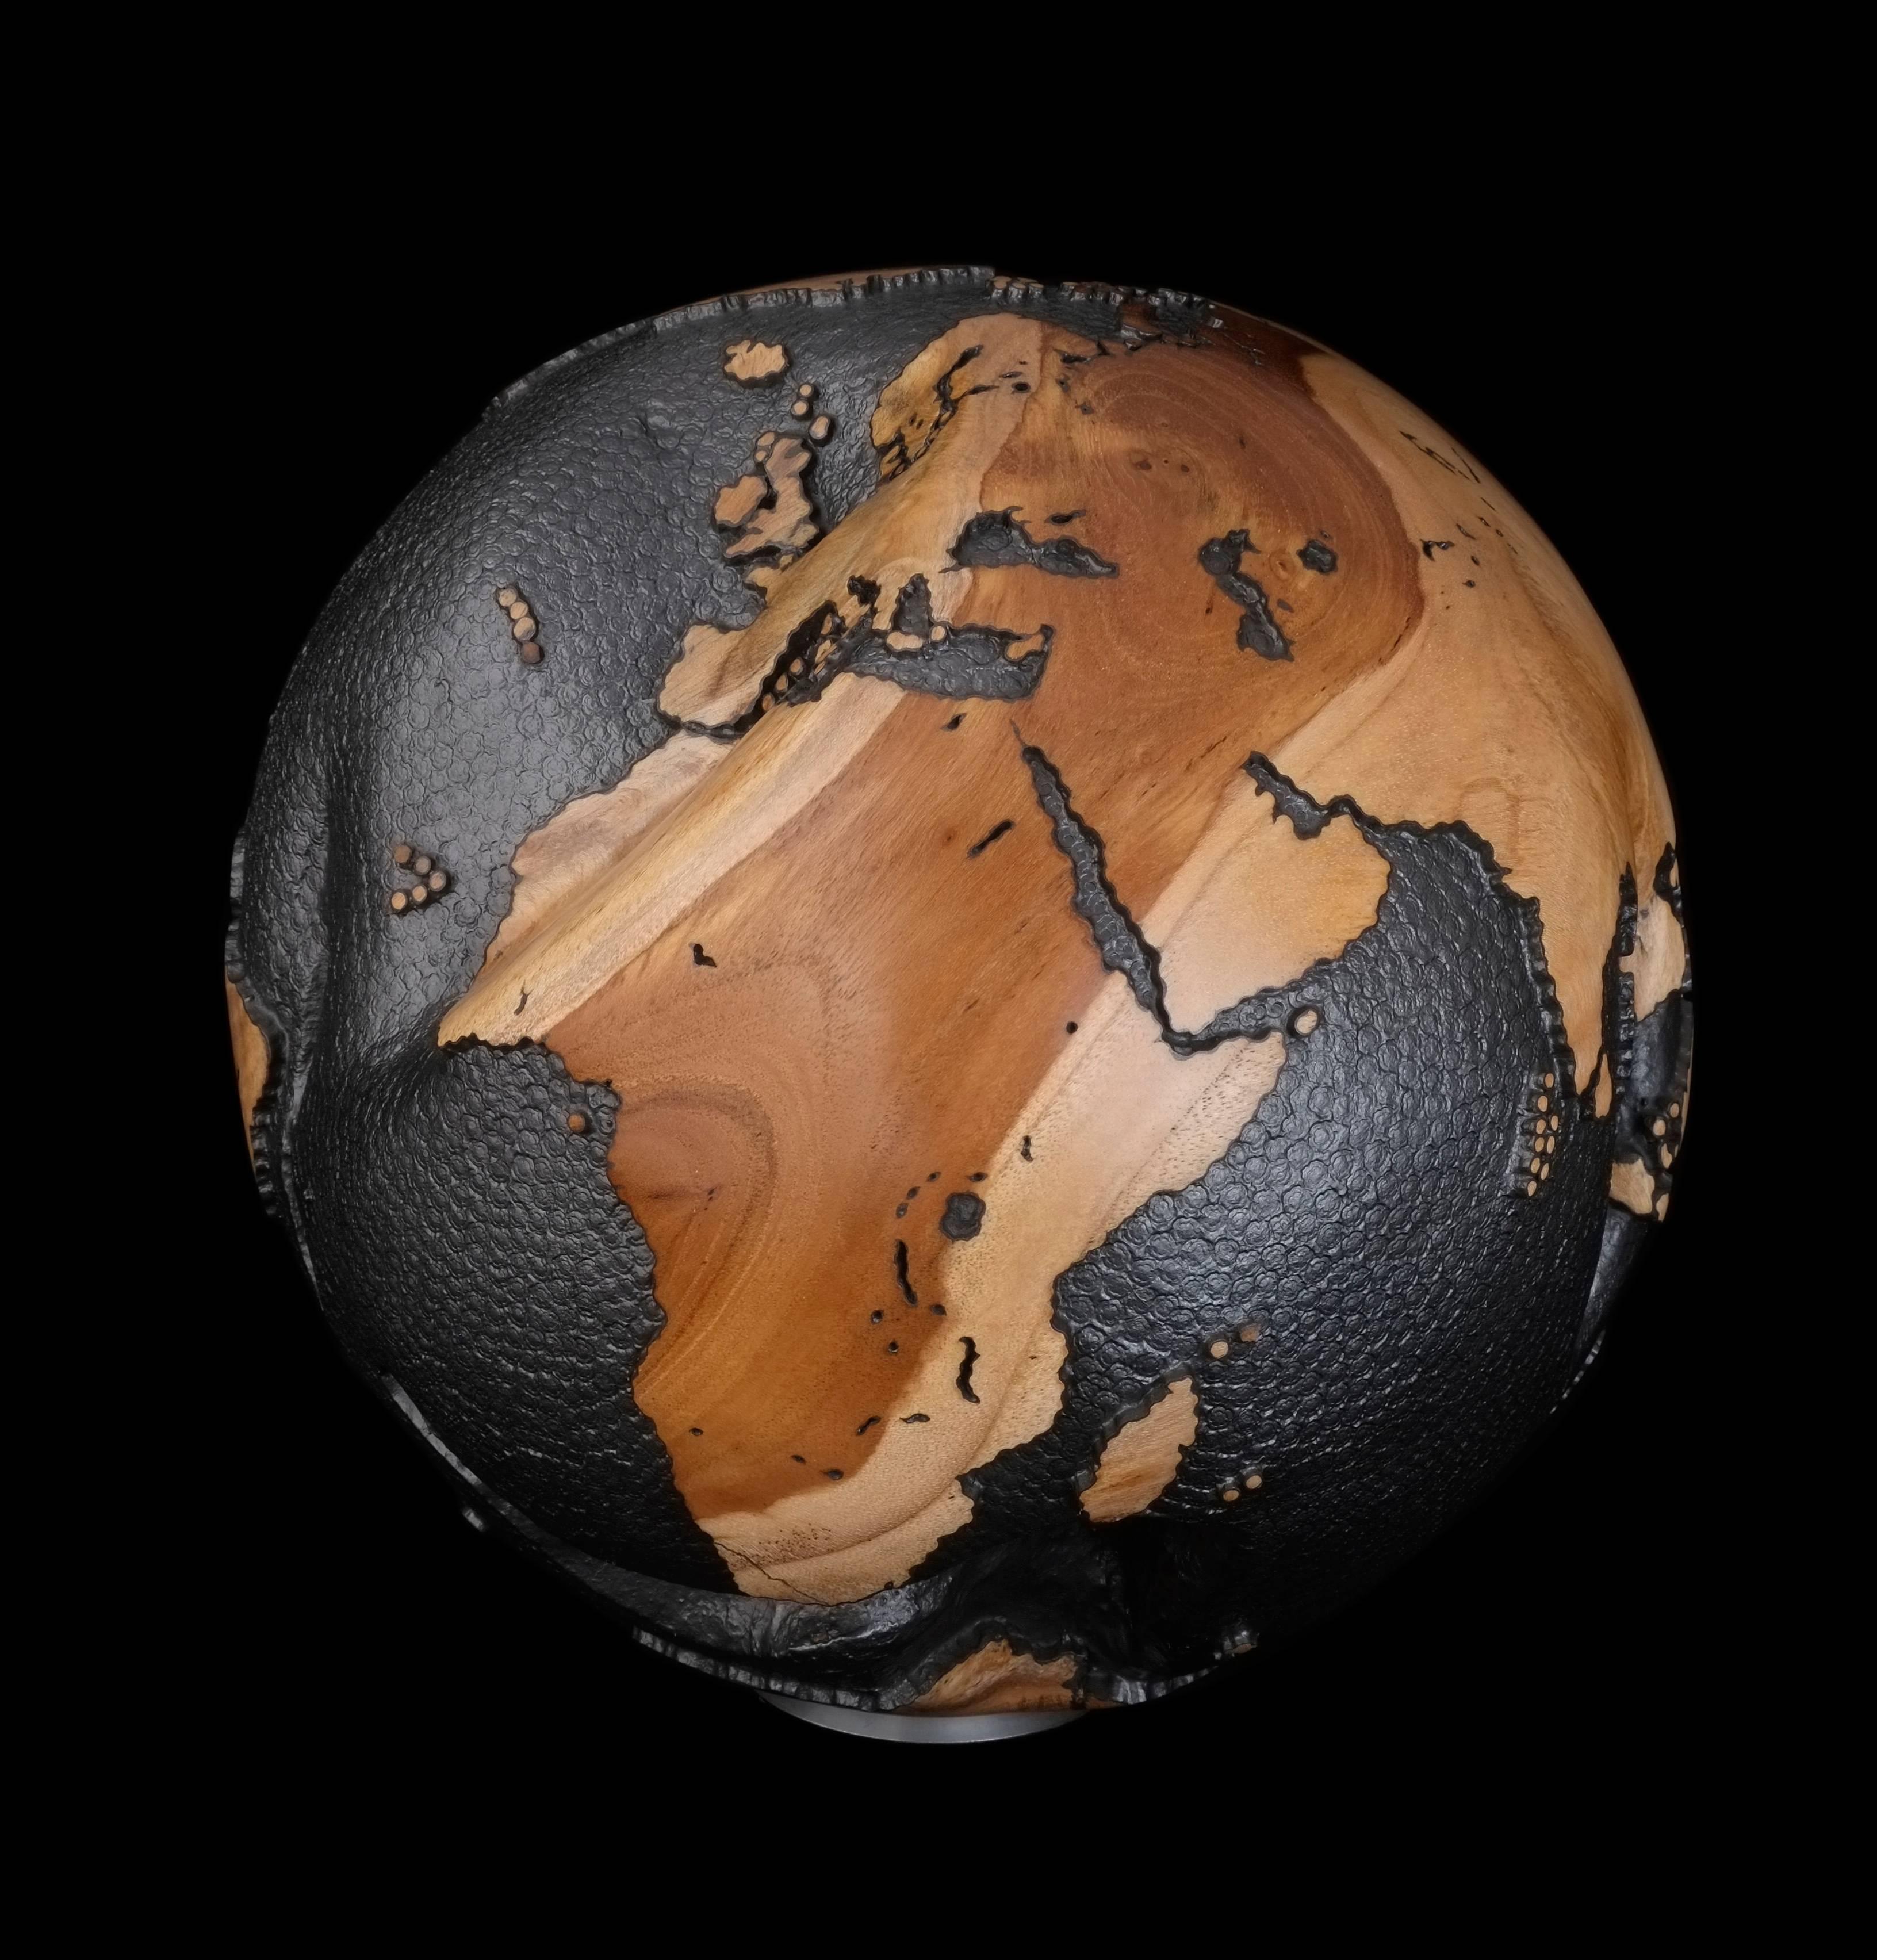 Gold Line accents wooden globe is made from reclaimed teak root, thin gold line accents on some crevices of the wood create astonishing harmony to the natural stripes of the continents with steel hammered round and graphite finishing on the ocean